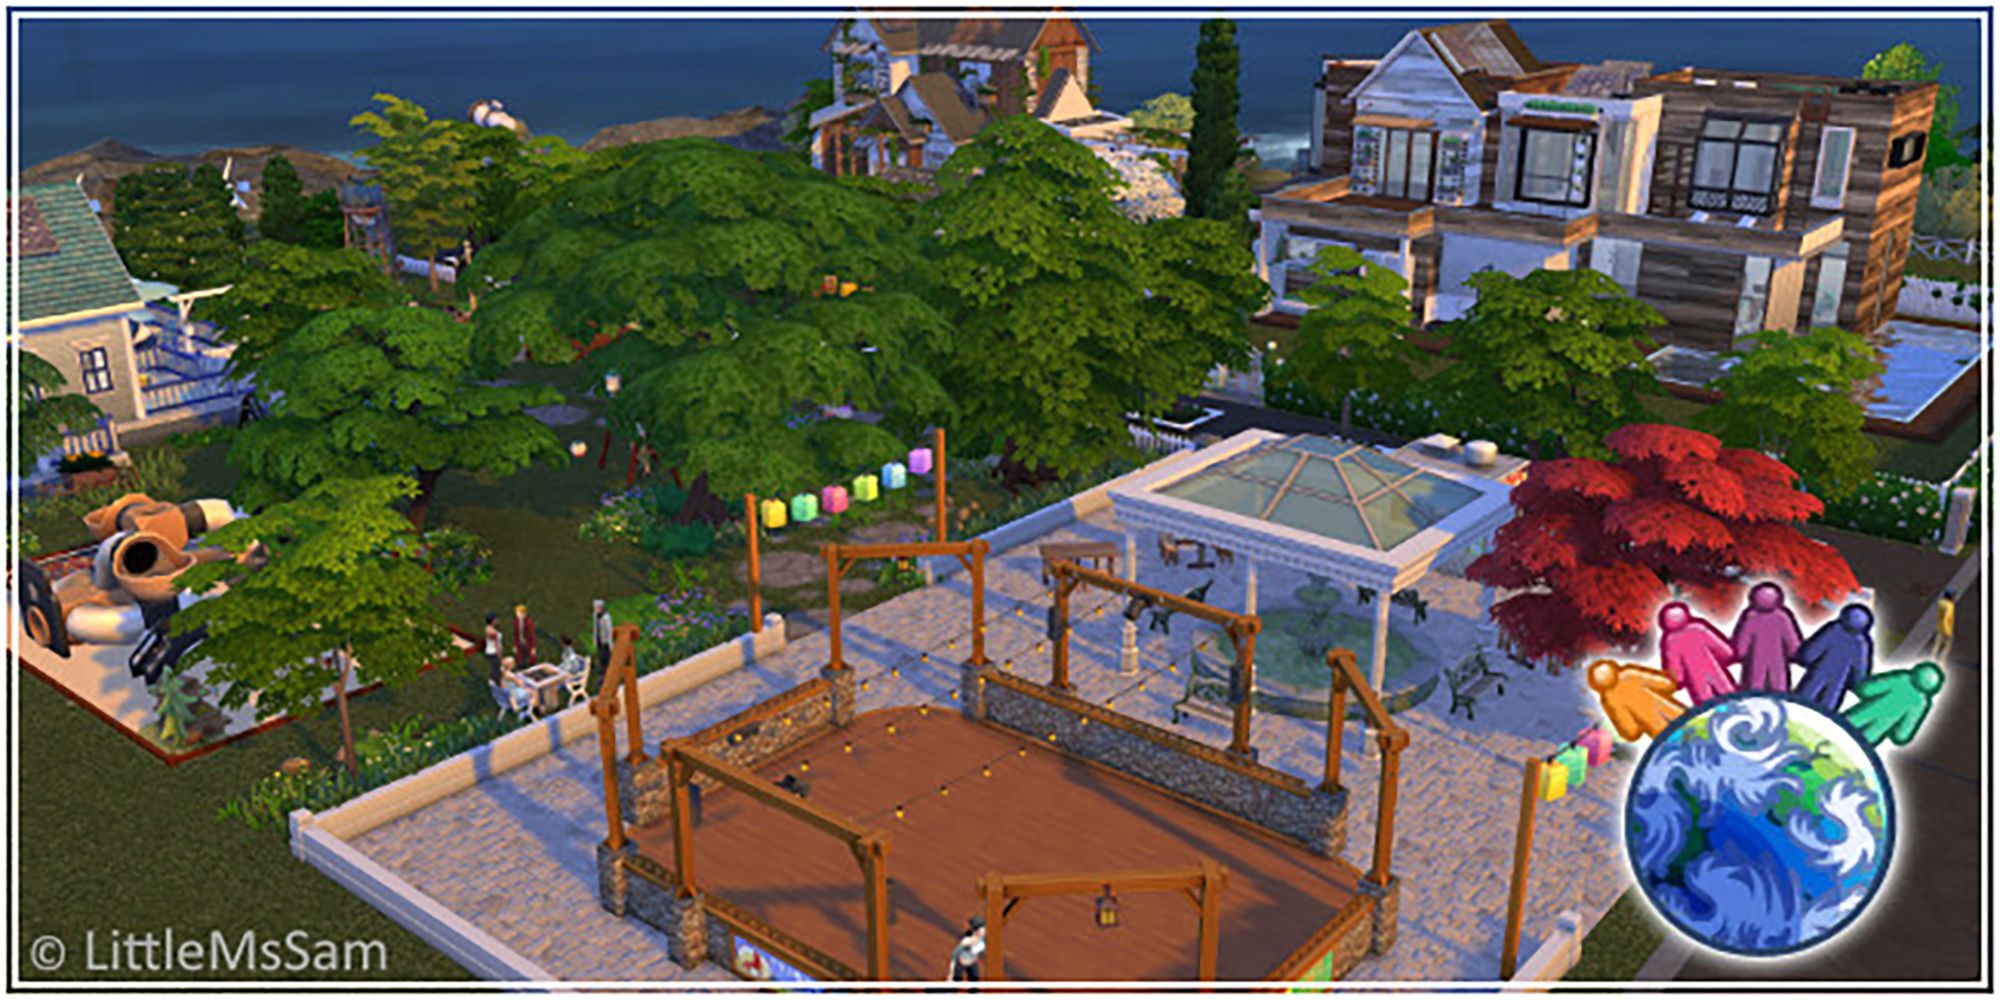 LittleMsSam's My Little Neighborhood mod allows Simmers to create lots shared by residential and public places for a more realistic neighborly experience.